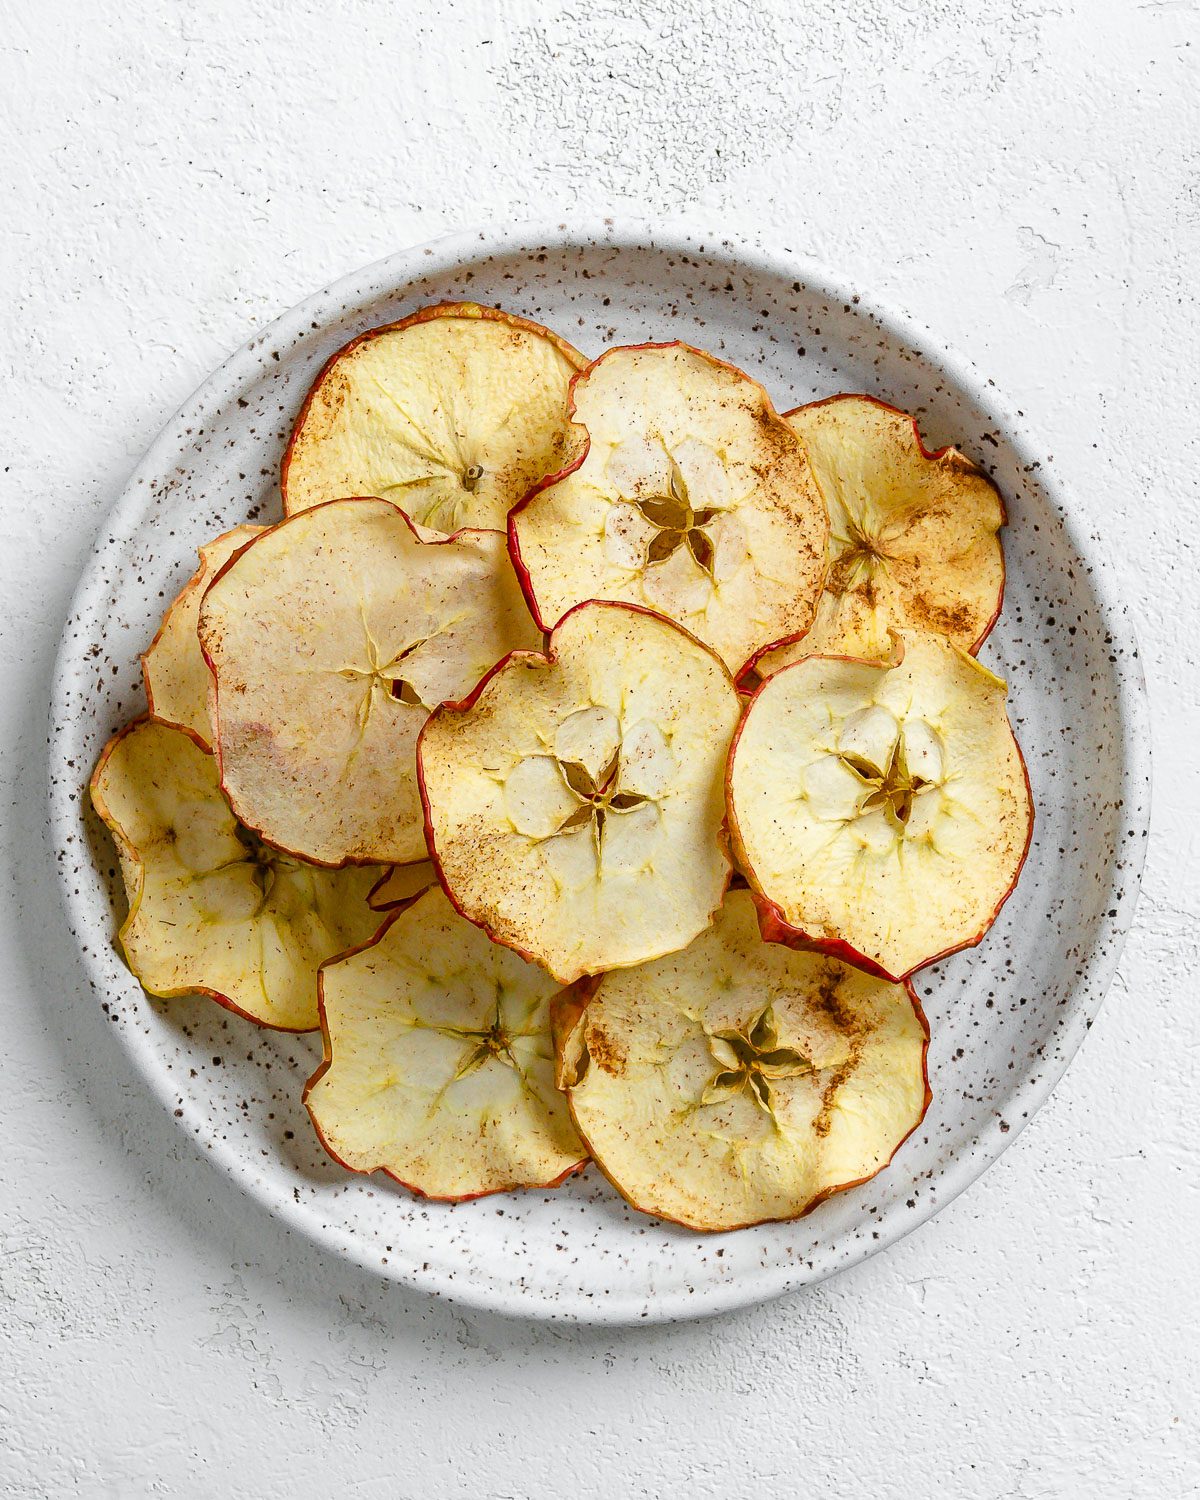 completed Dehydrator Apple Chips on a white plate against a white background